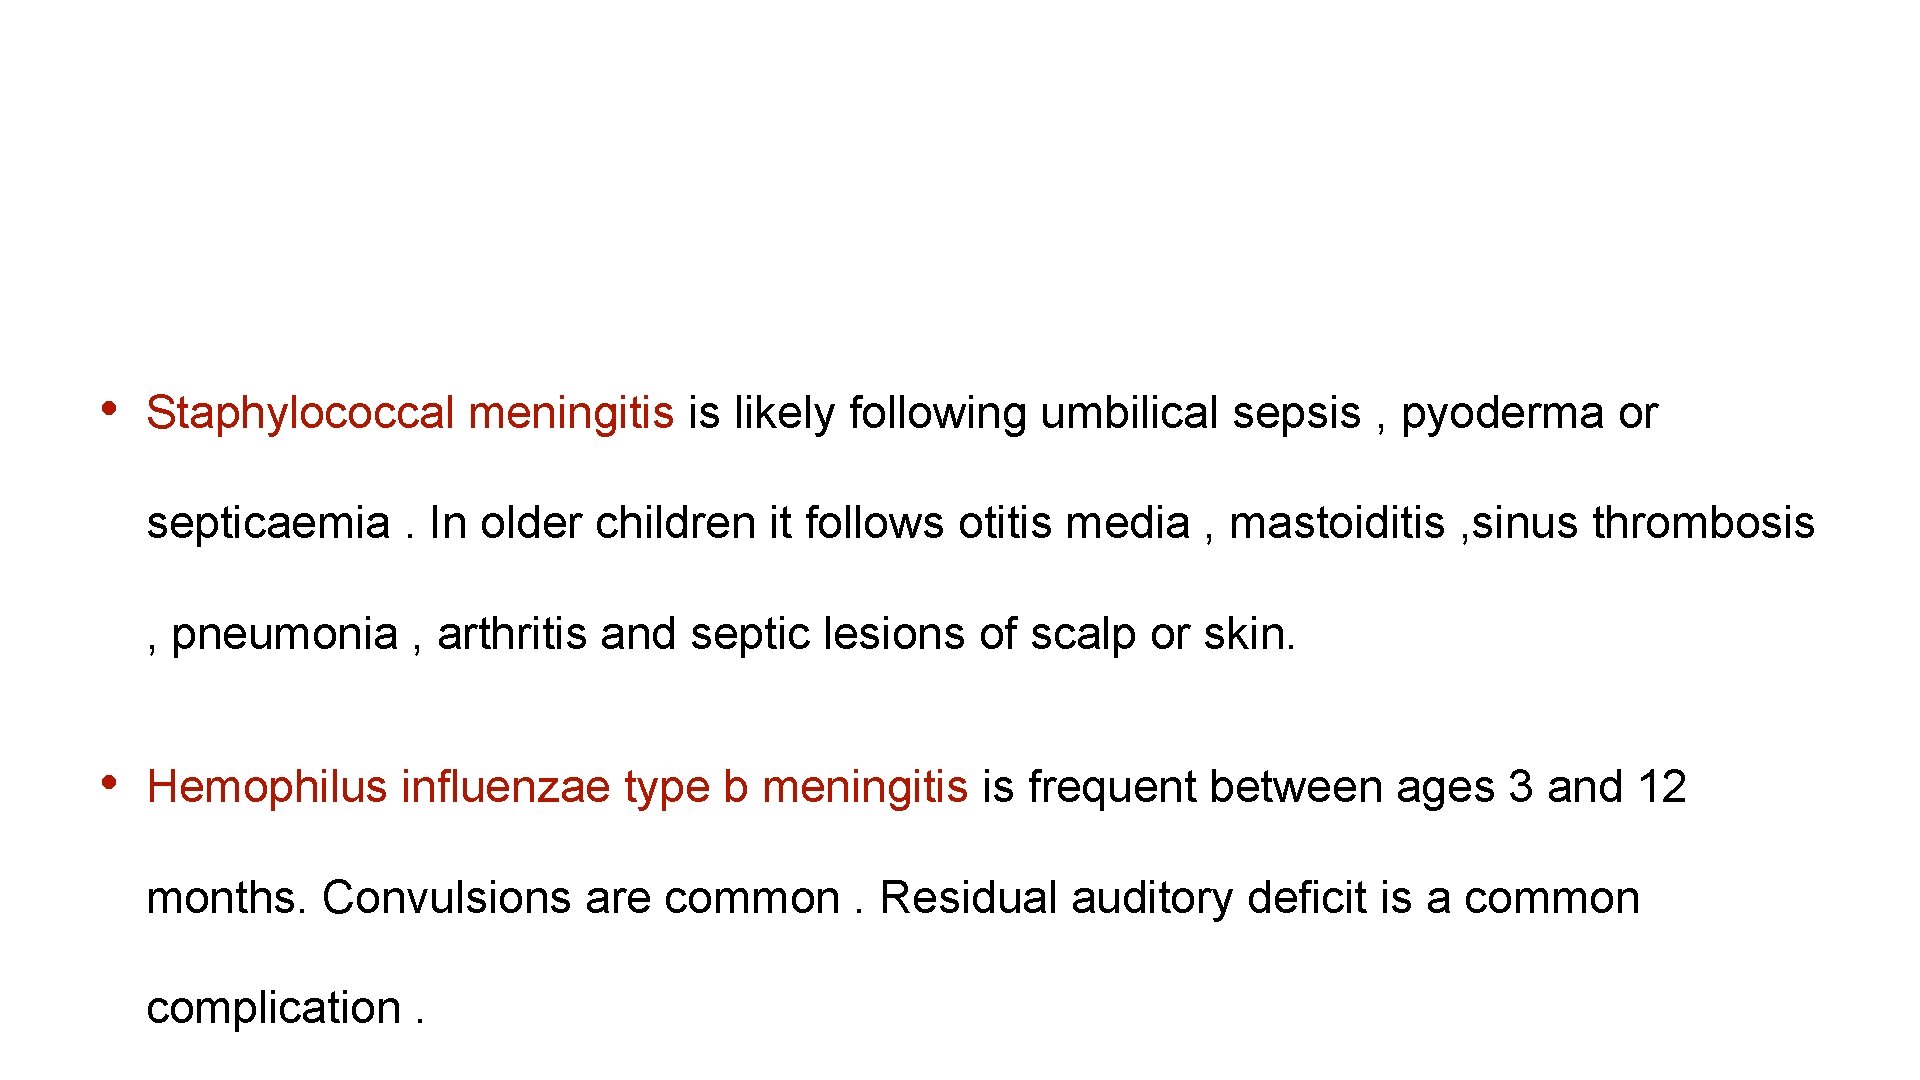  • Staphylococcal meningitis is likely following umbilical sepsis , pyoderma or septicaemia. In